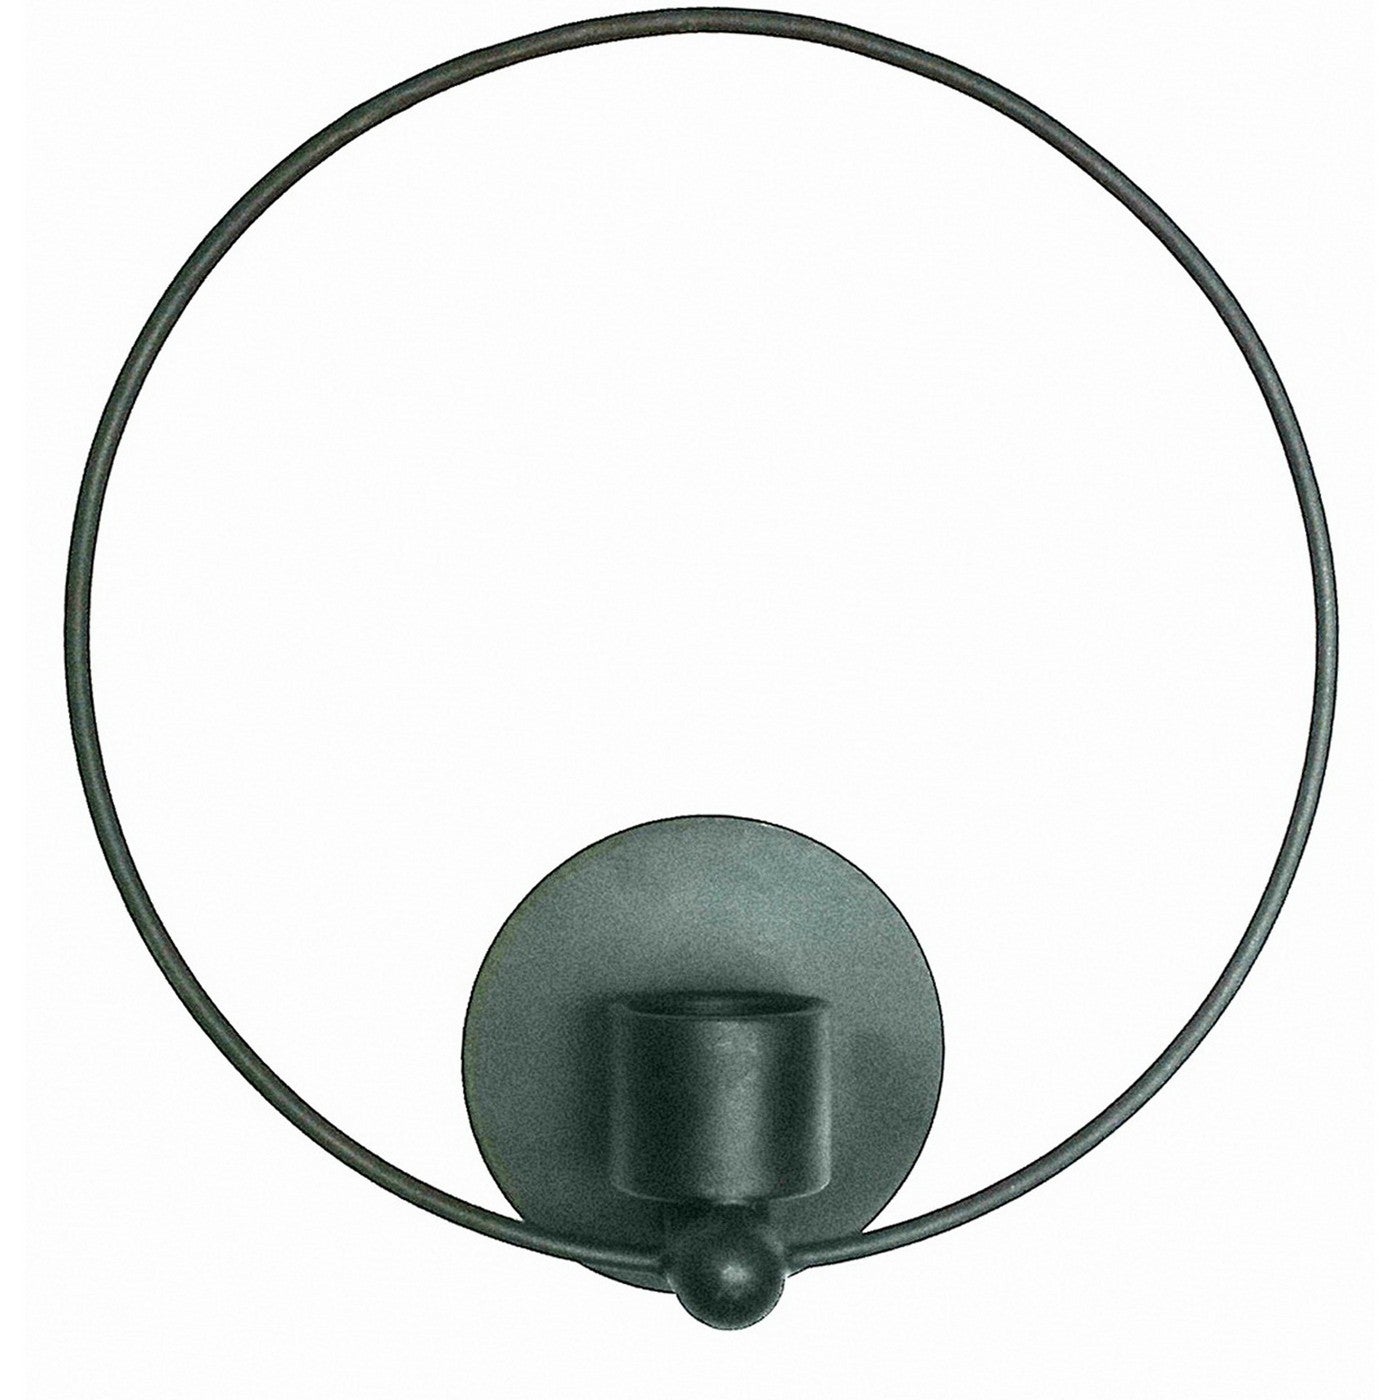 10 – candle sconce wall hanger